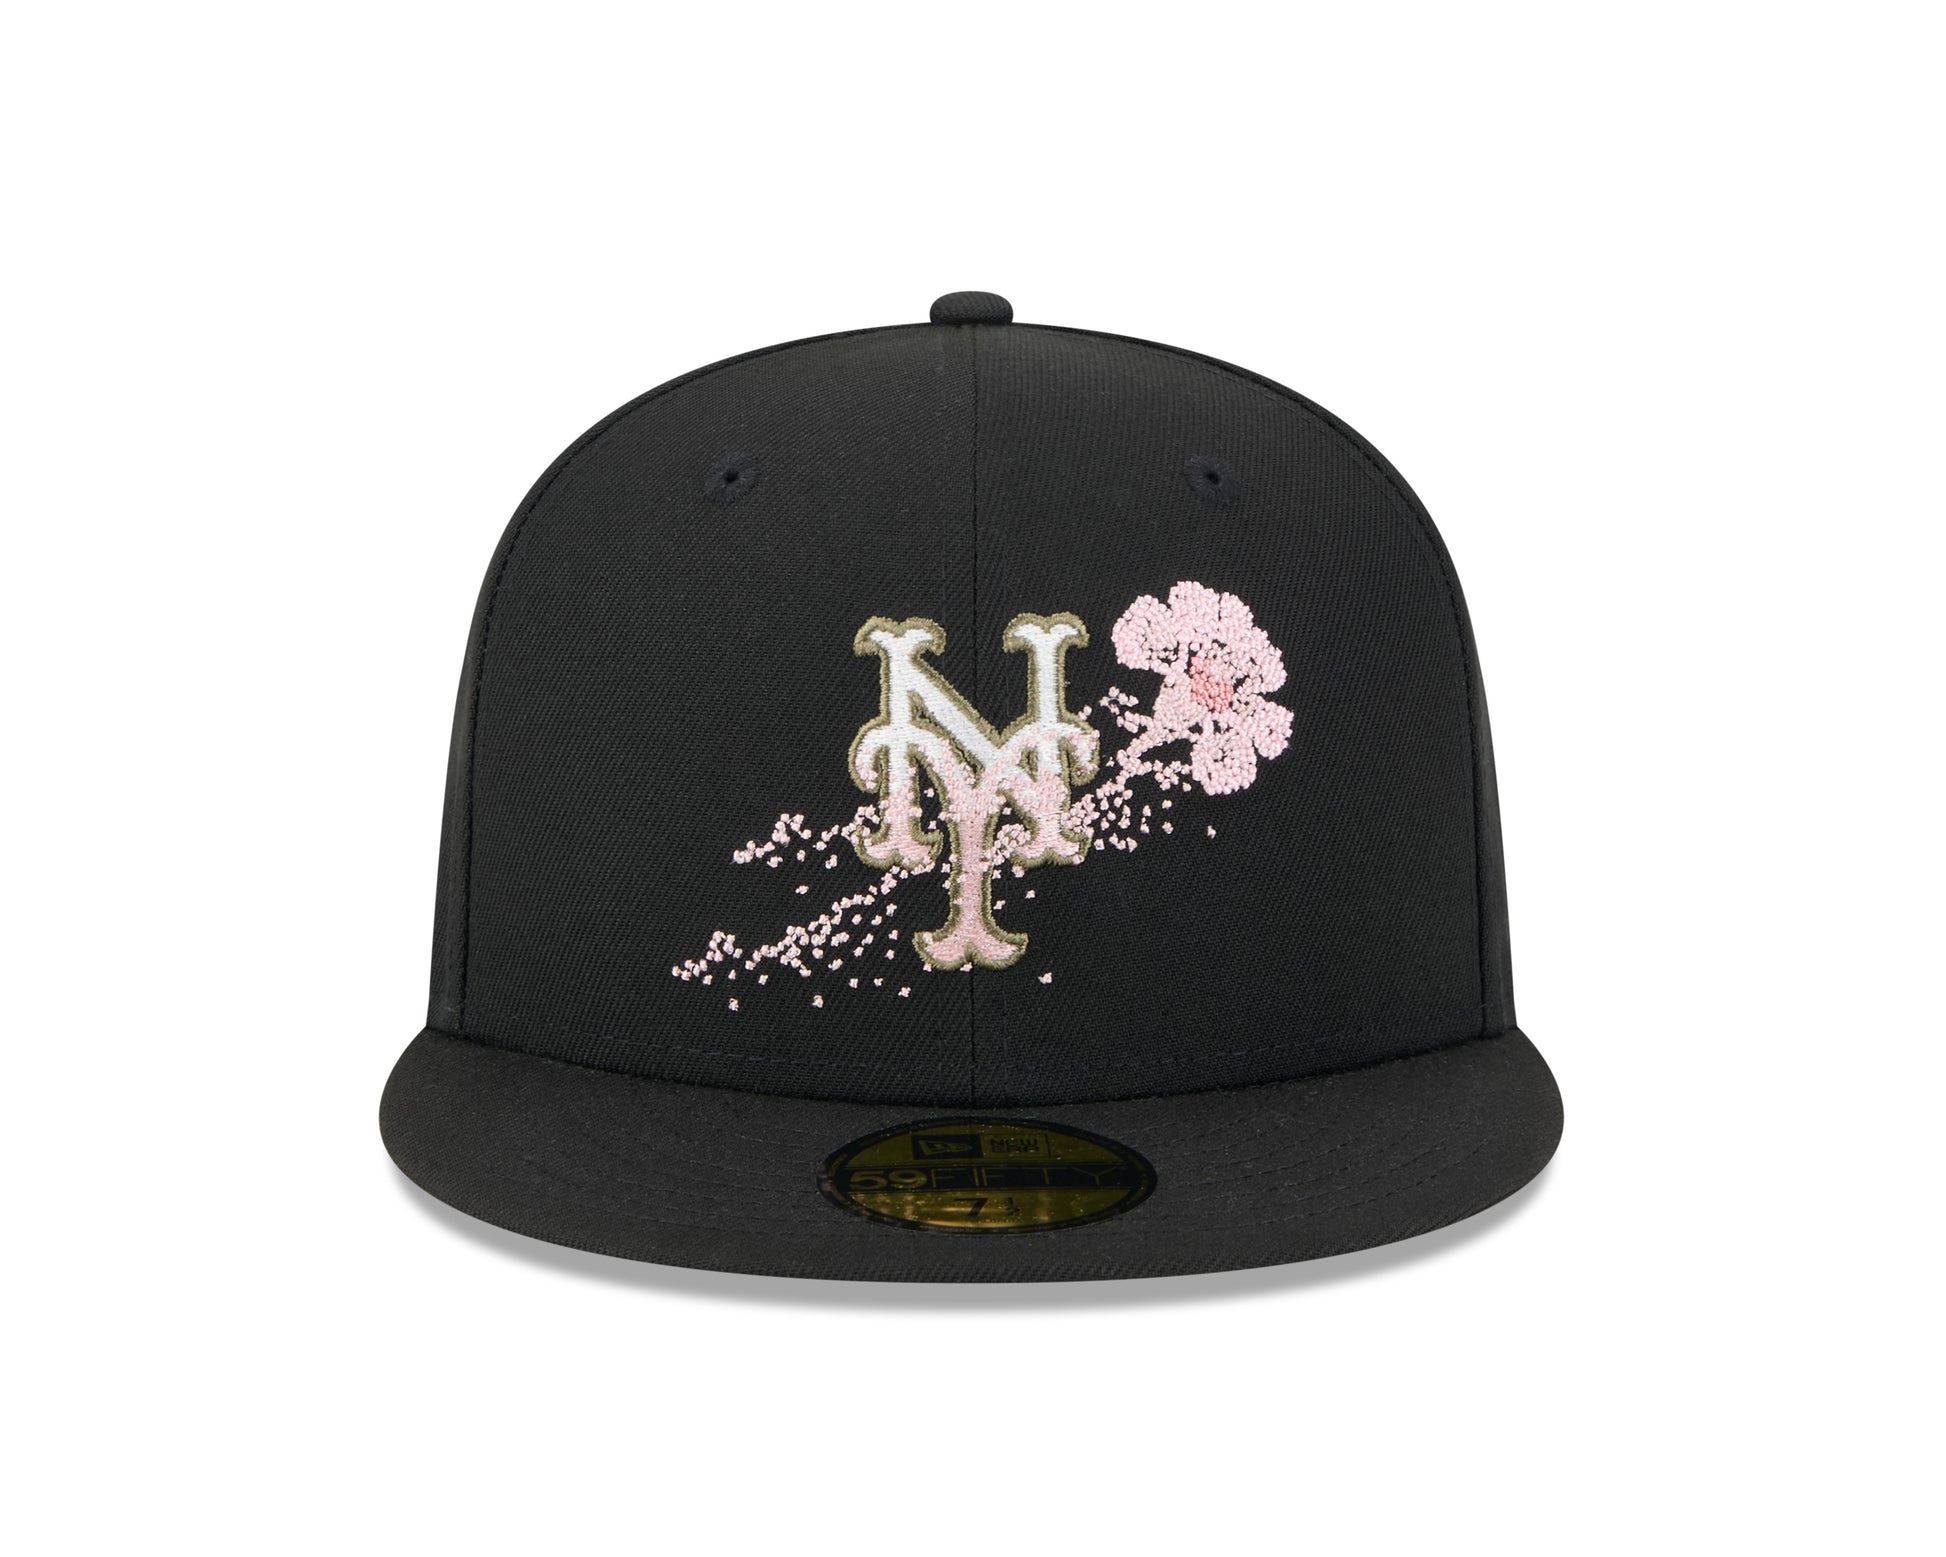 New Era - 59fifty Fitted Cap - New York Mets - DOTTED FLORAL - Black - Headz Up 